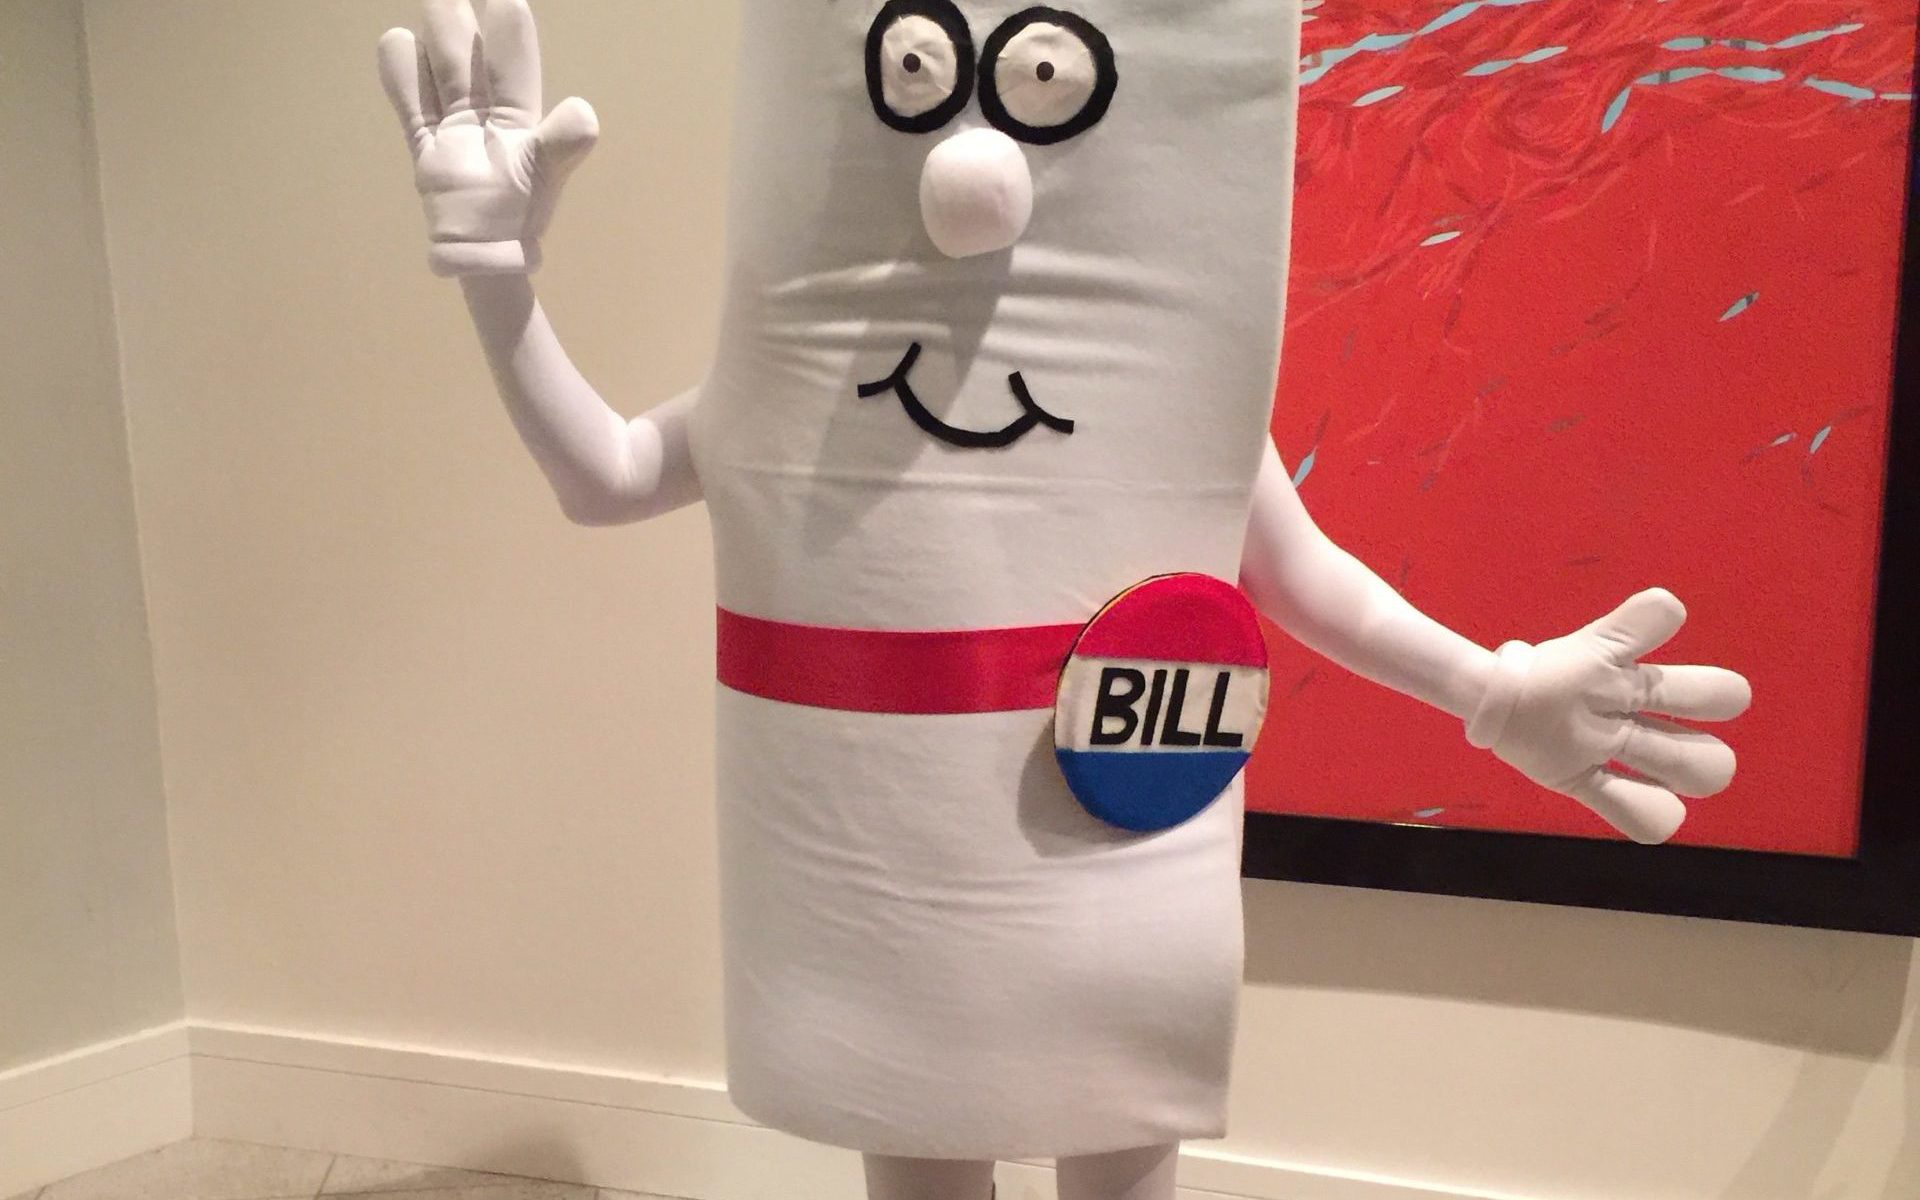 Color photograph of a person in a school hallway dressed in a Schoolhouse Rock "I'm a Bill" costume